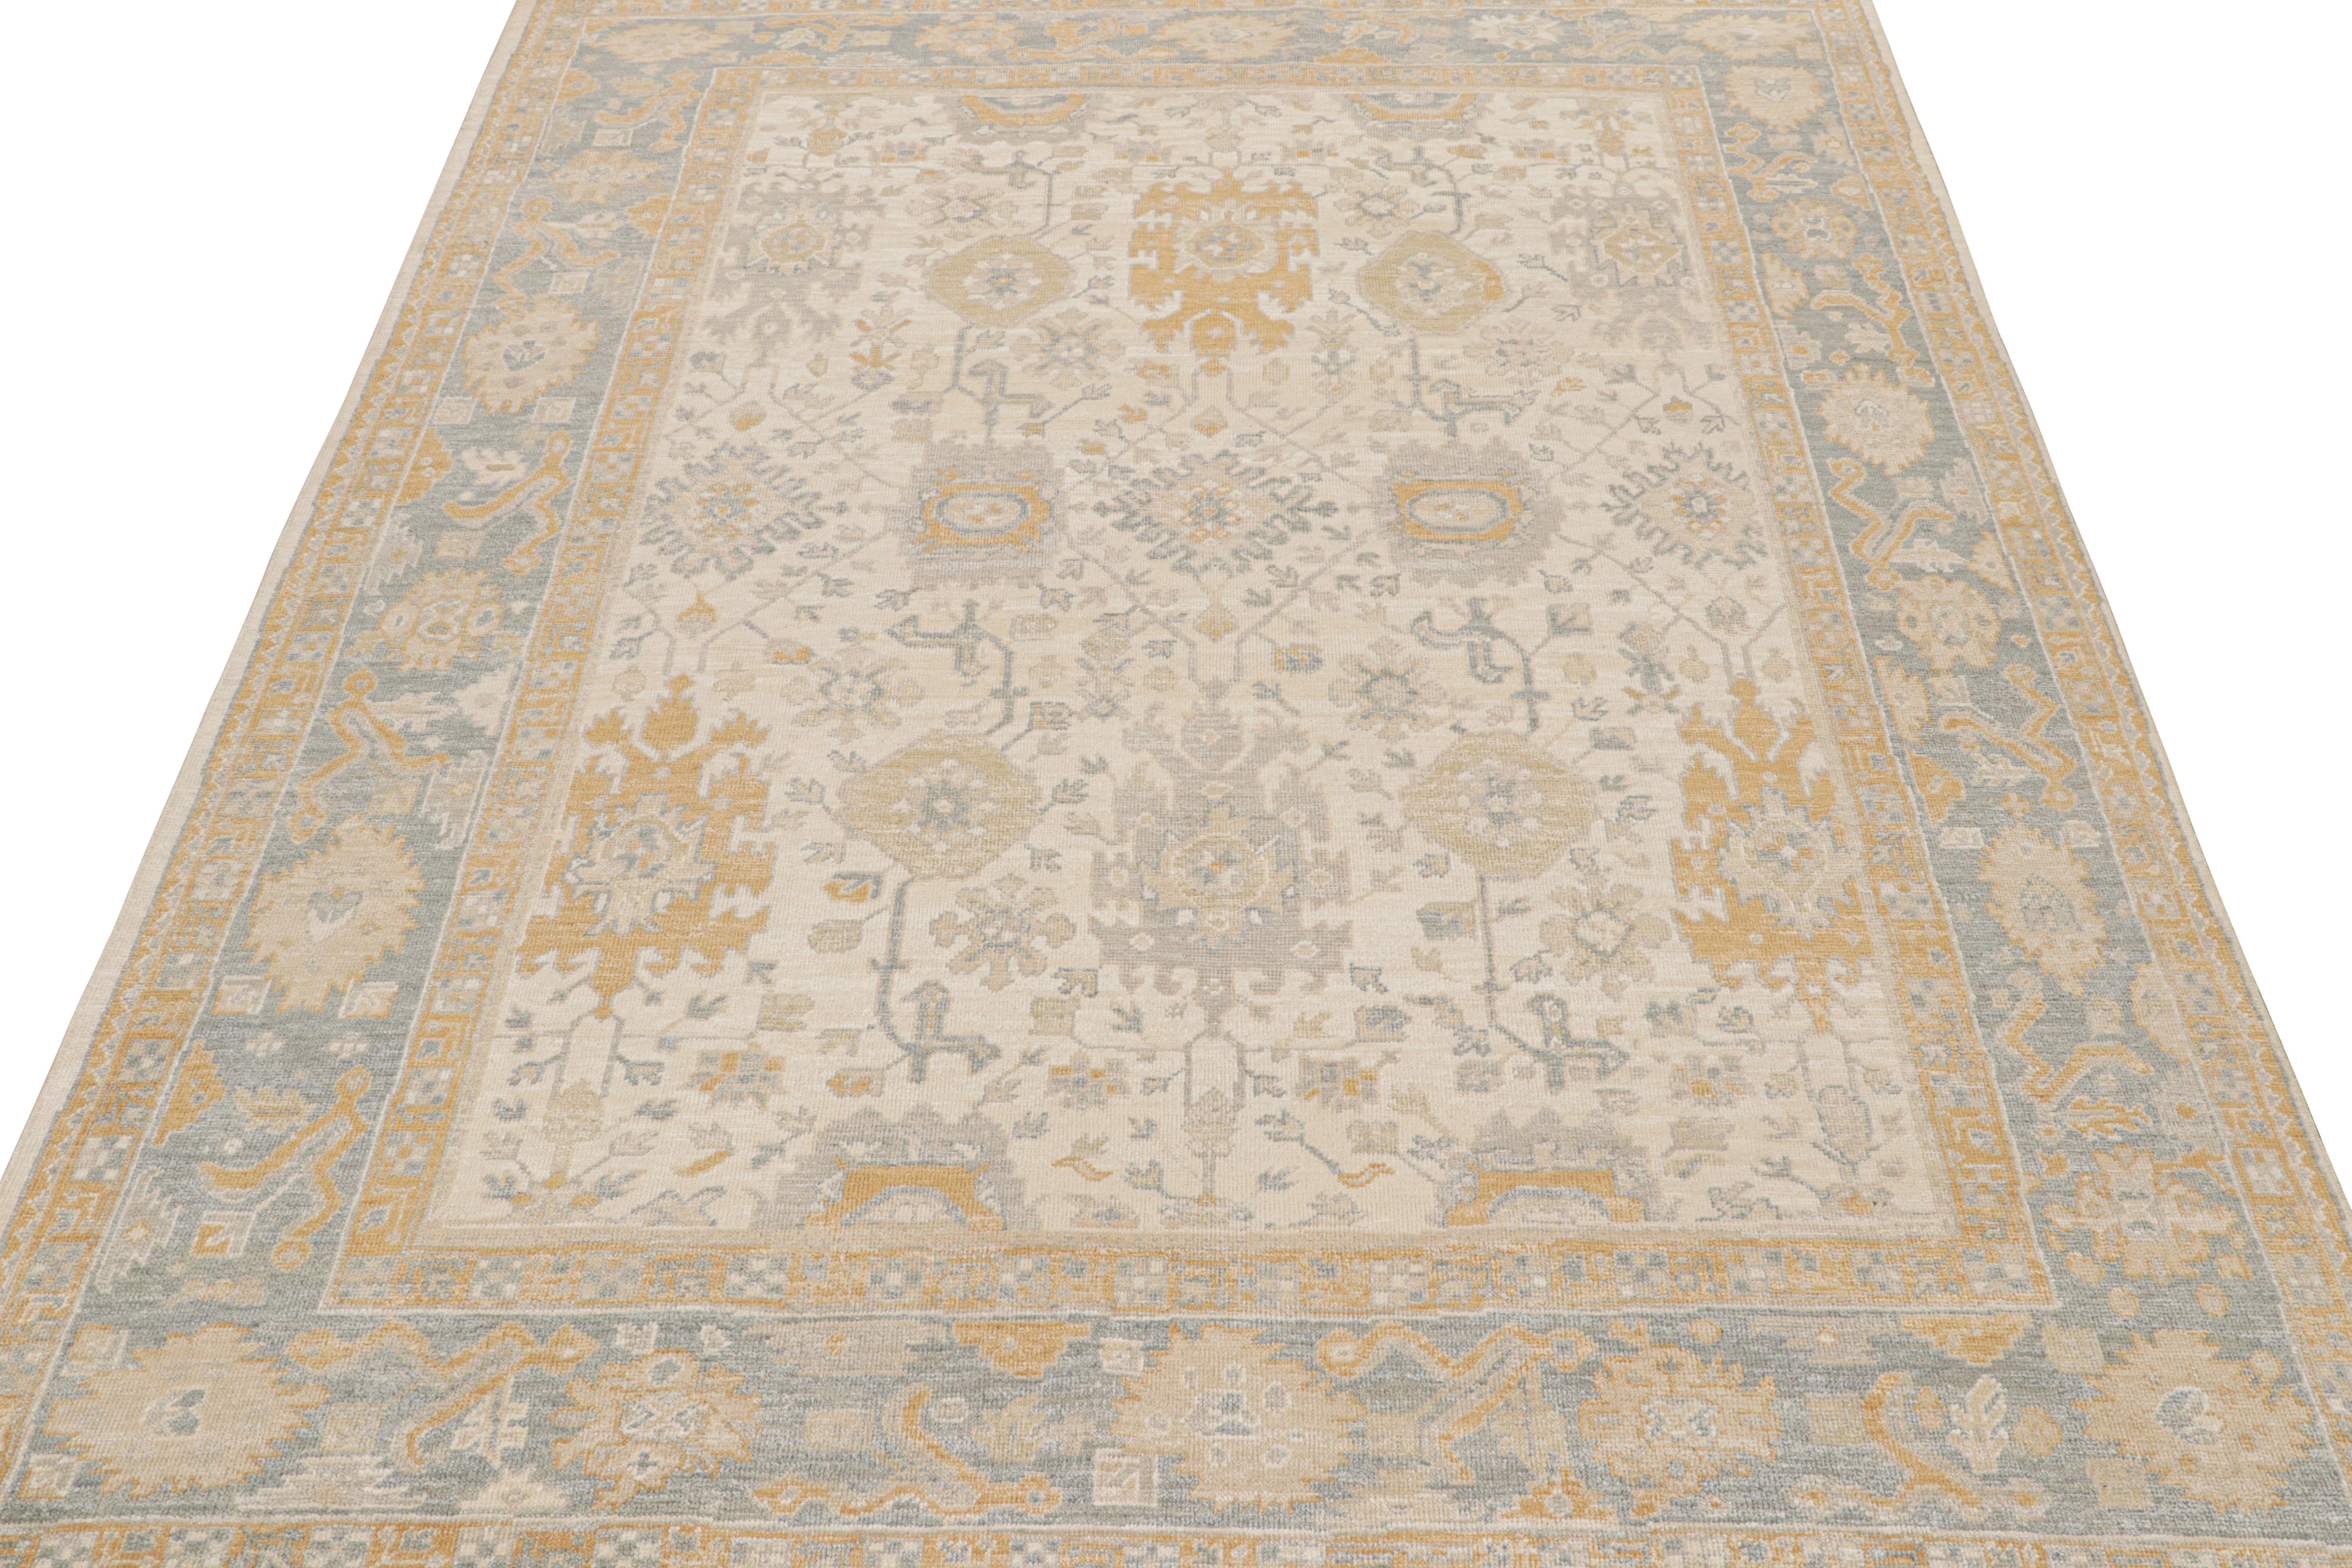 Indian Rug & Kilim’s Oushak Style Rug in Beige, Gold and Blue Floral Patterns For Sale